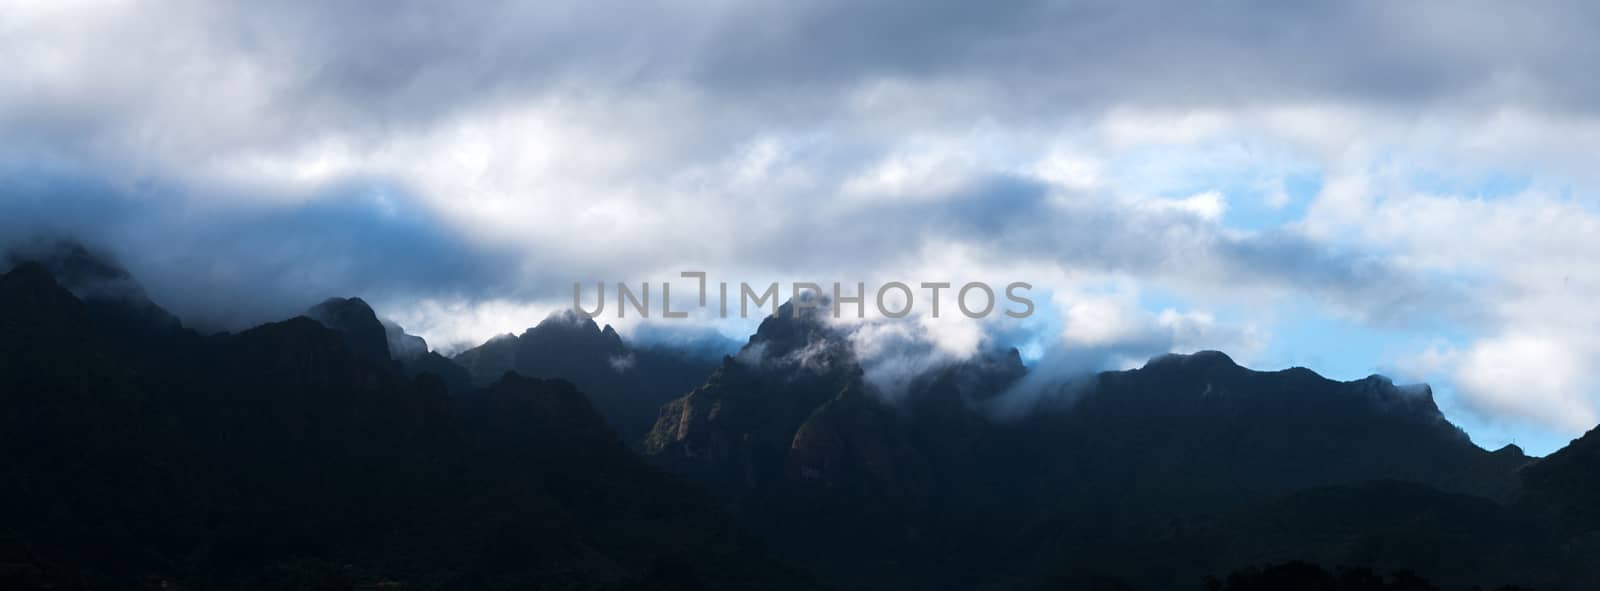 Mountain landscapes of Madeira Island by membio